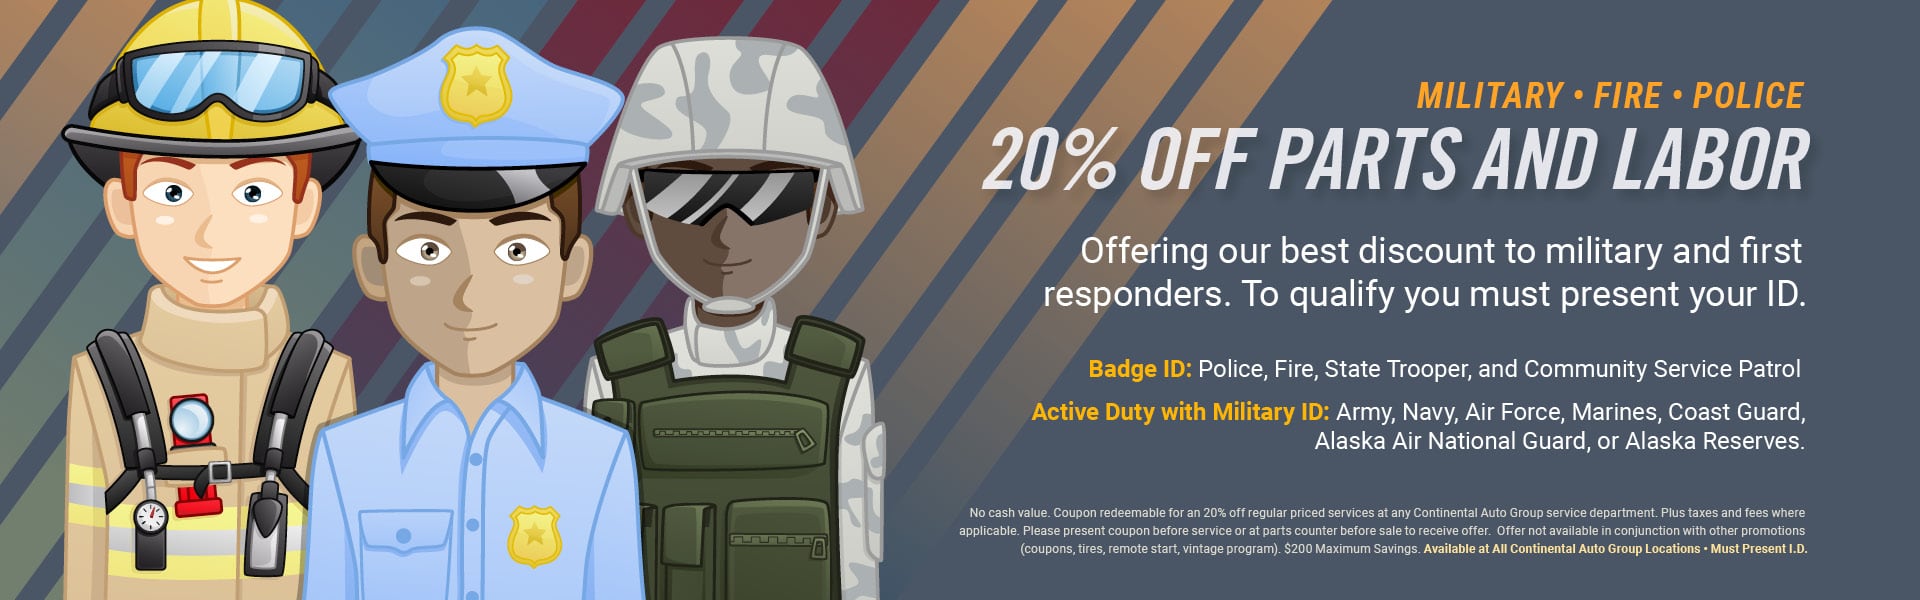 20% Off Parts and Labor For Military and First Responders. Thank you for serving our community!